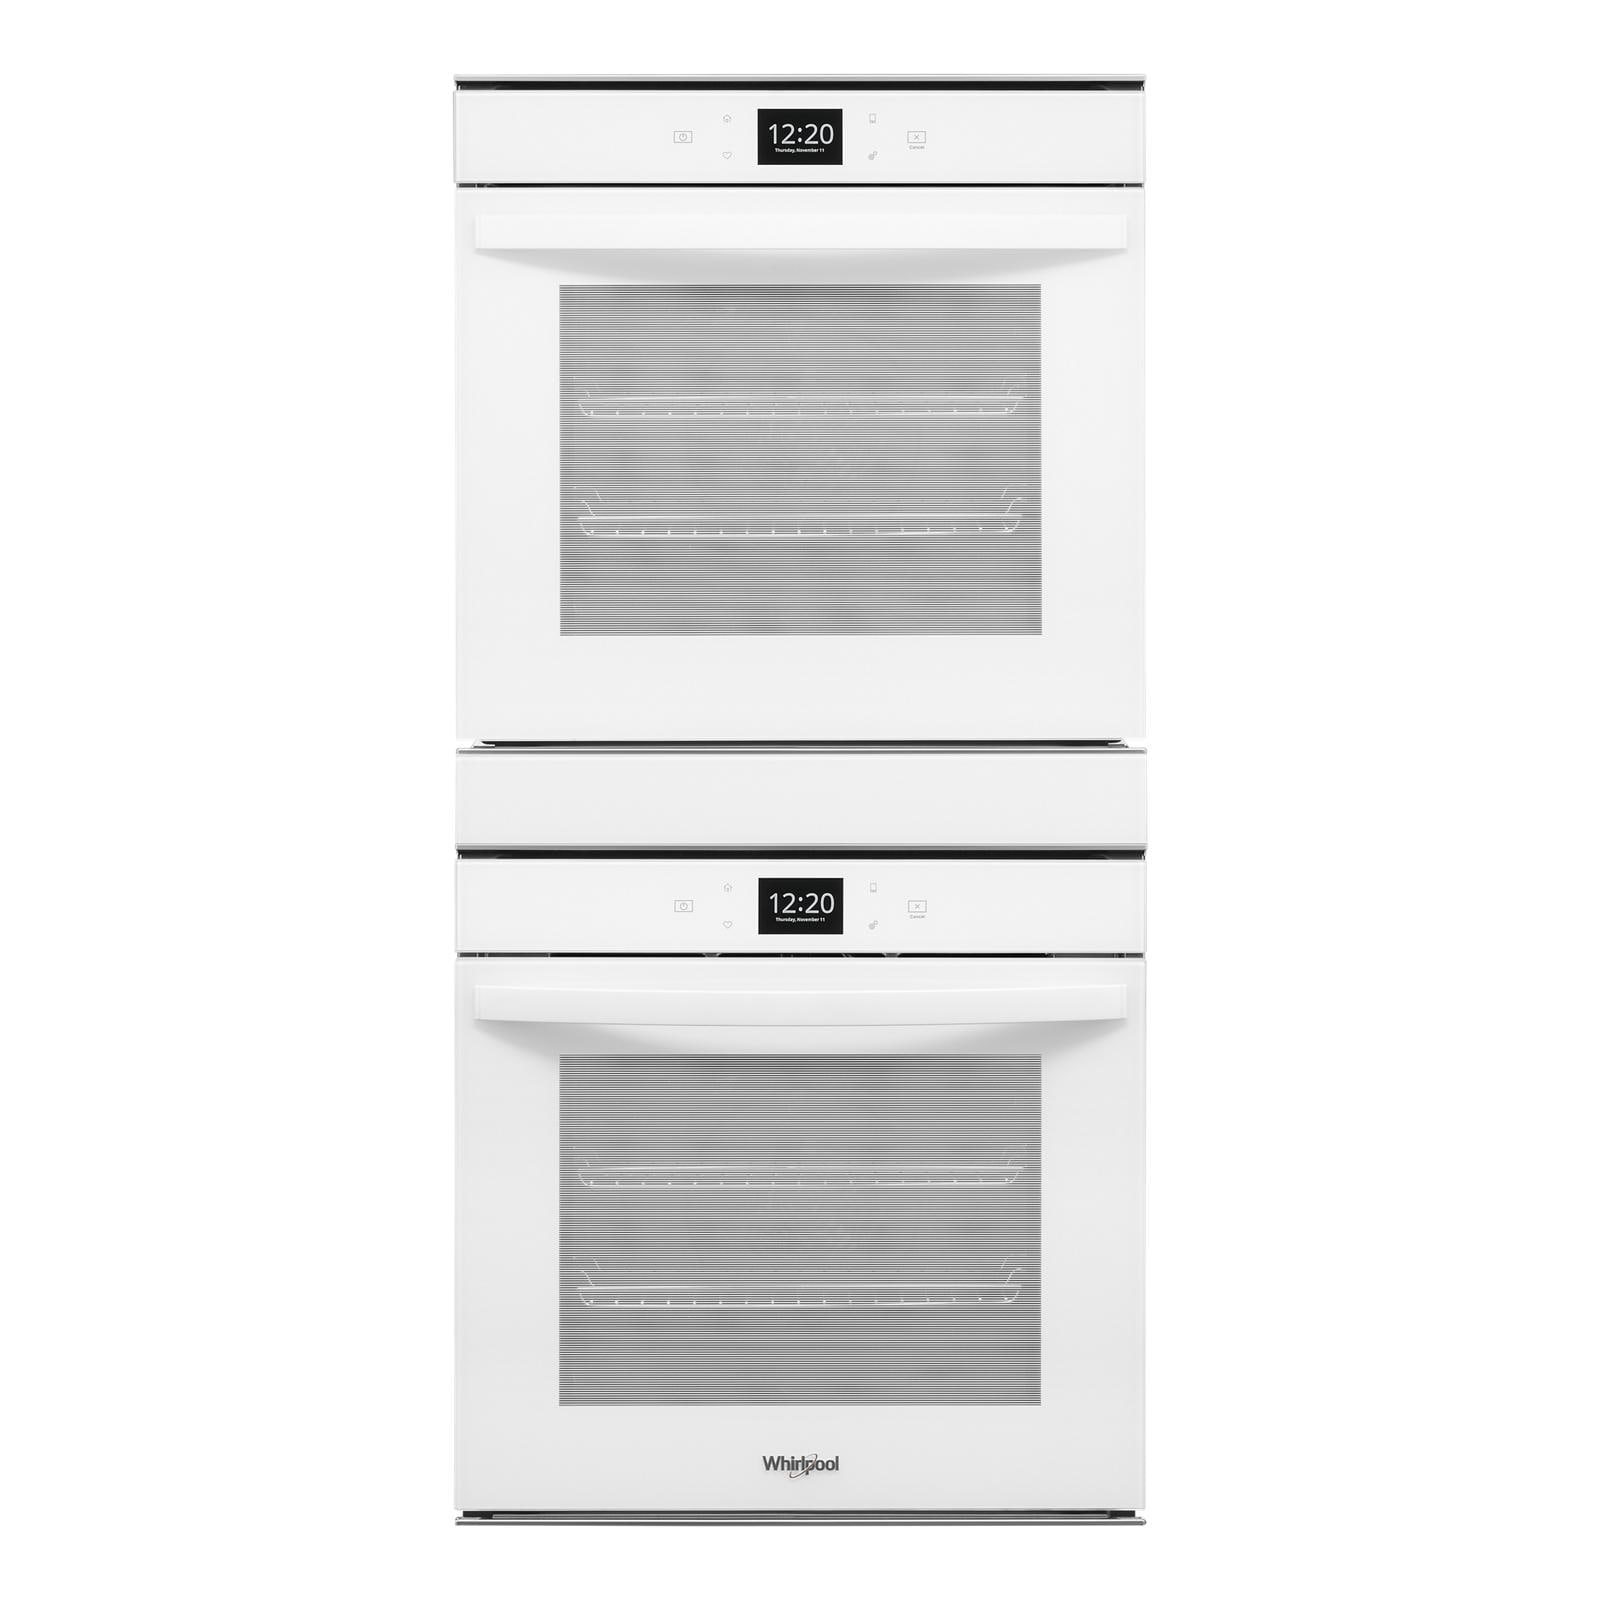  24 Self-Cleaning Electric Single Wall Oven : Appliances